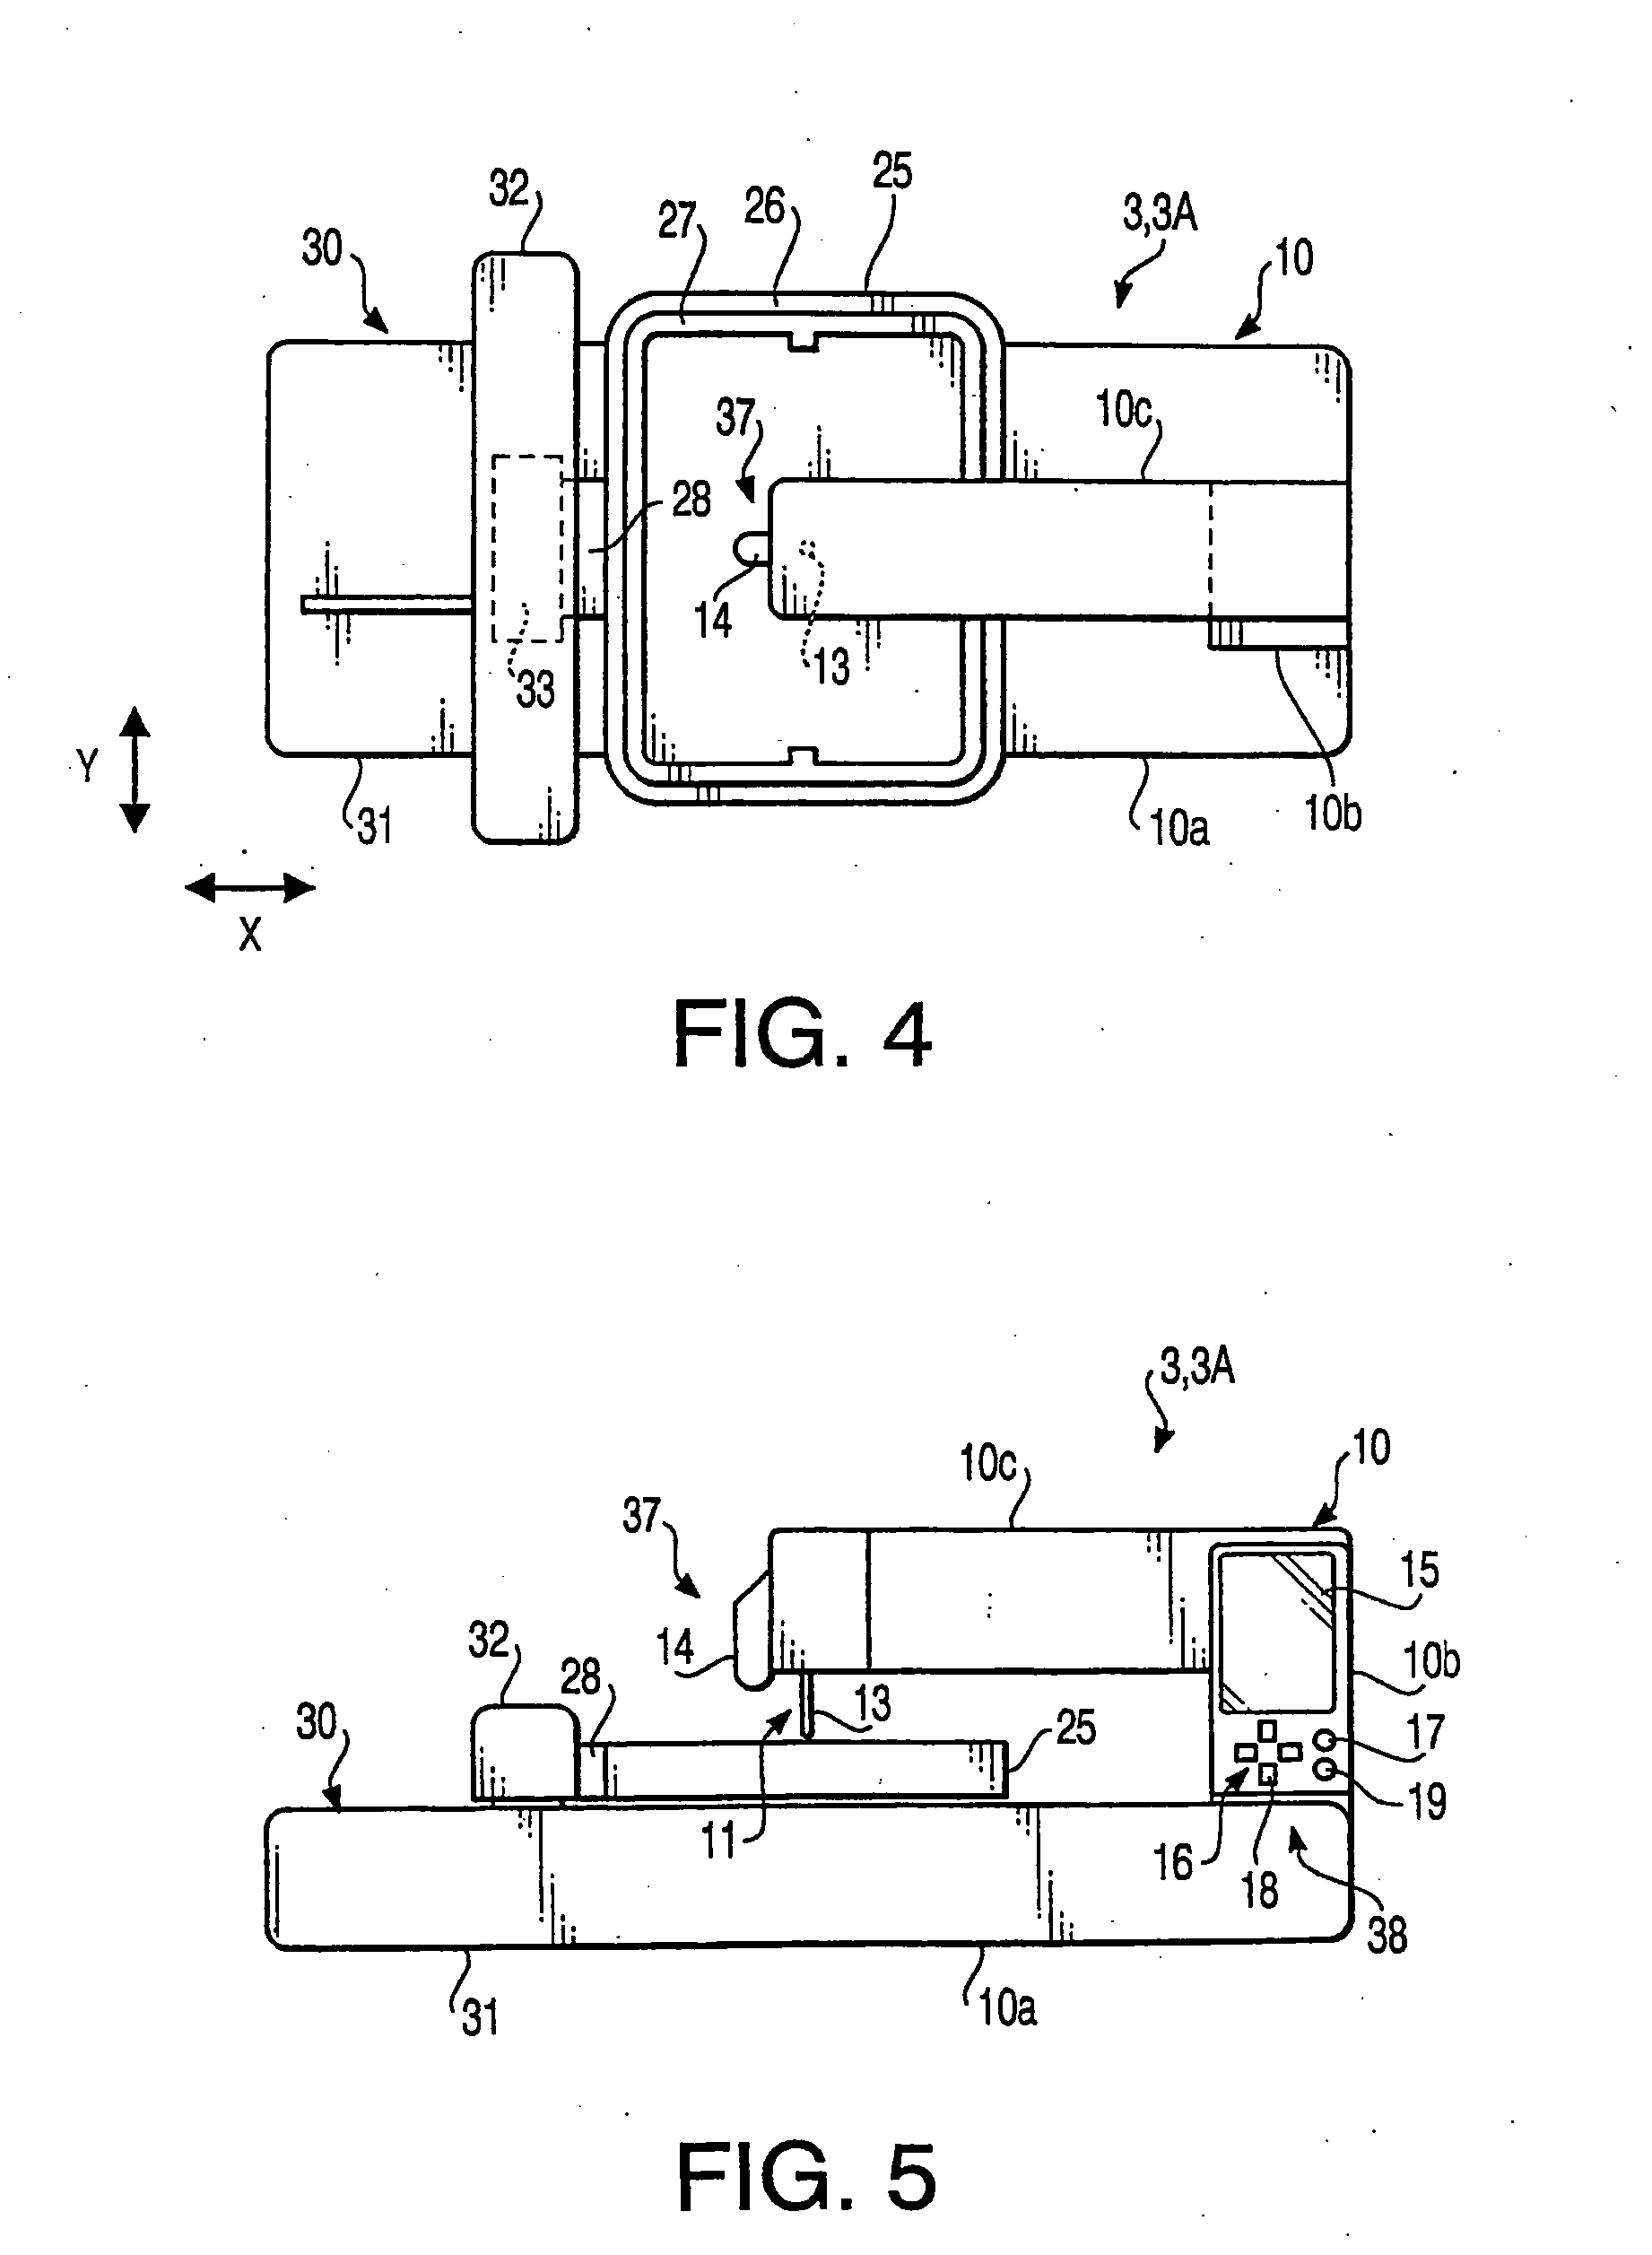 Data processing unit and pattern forming method